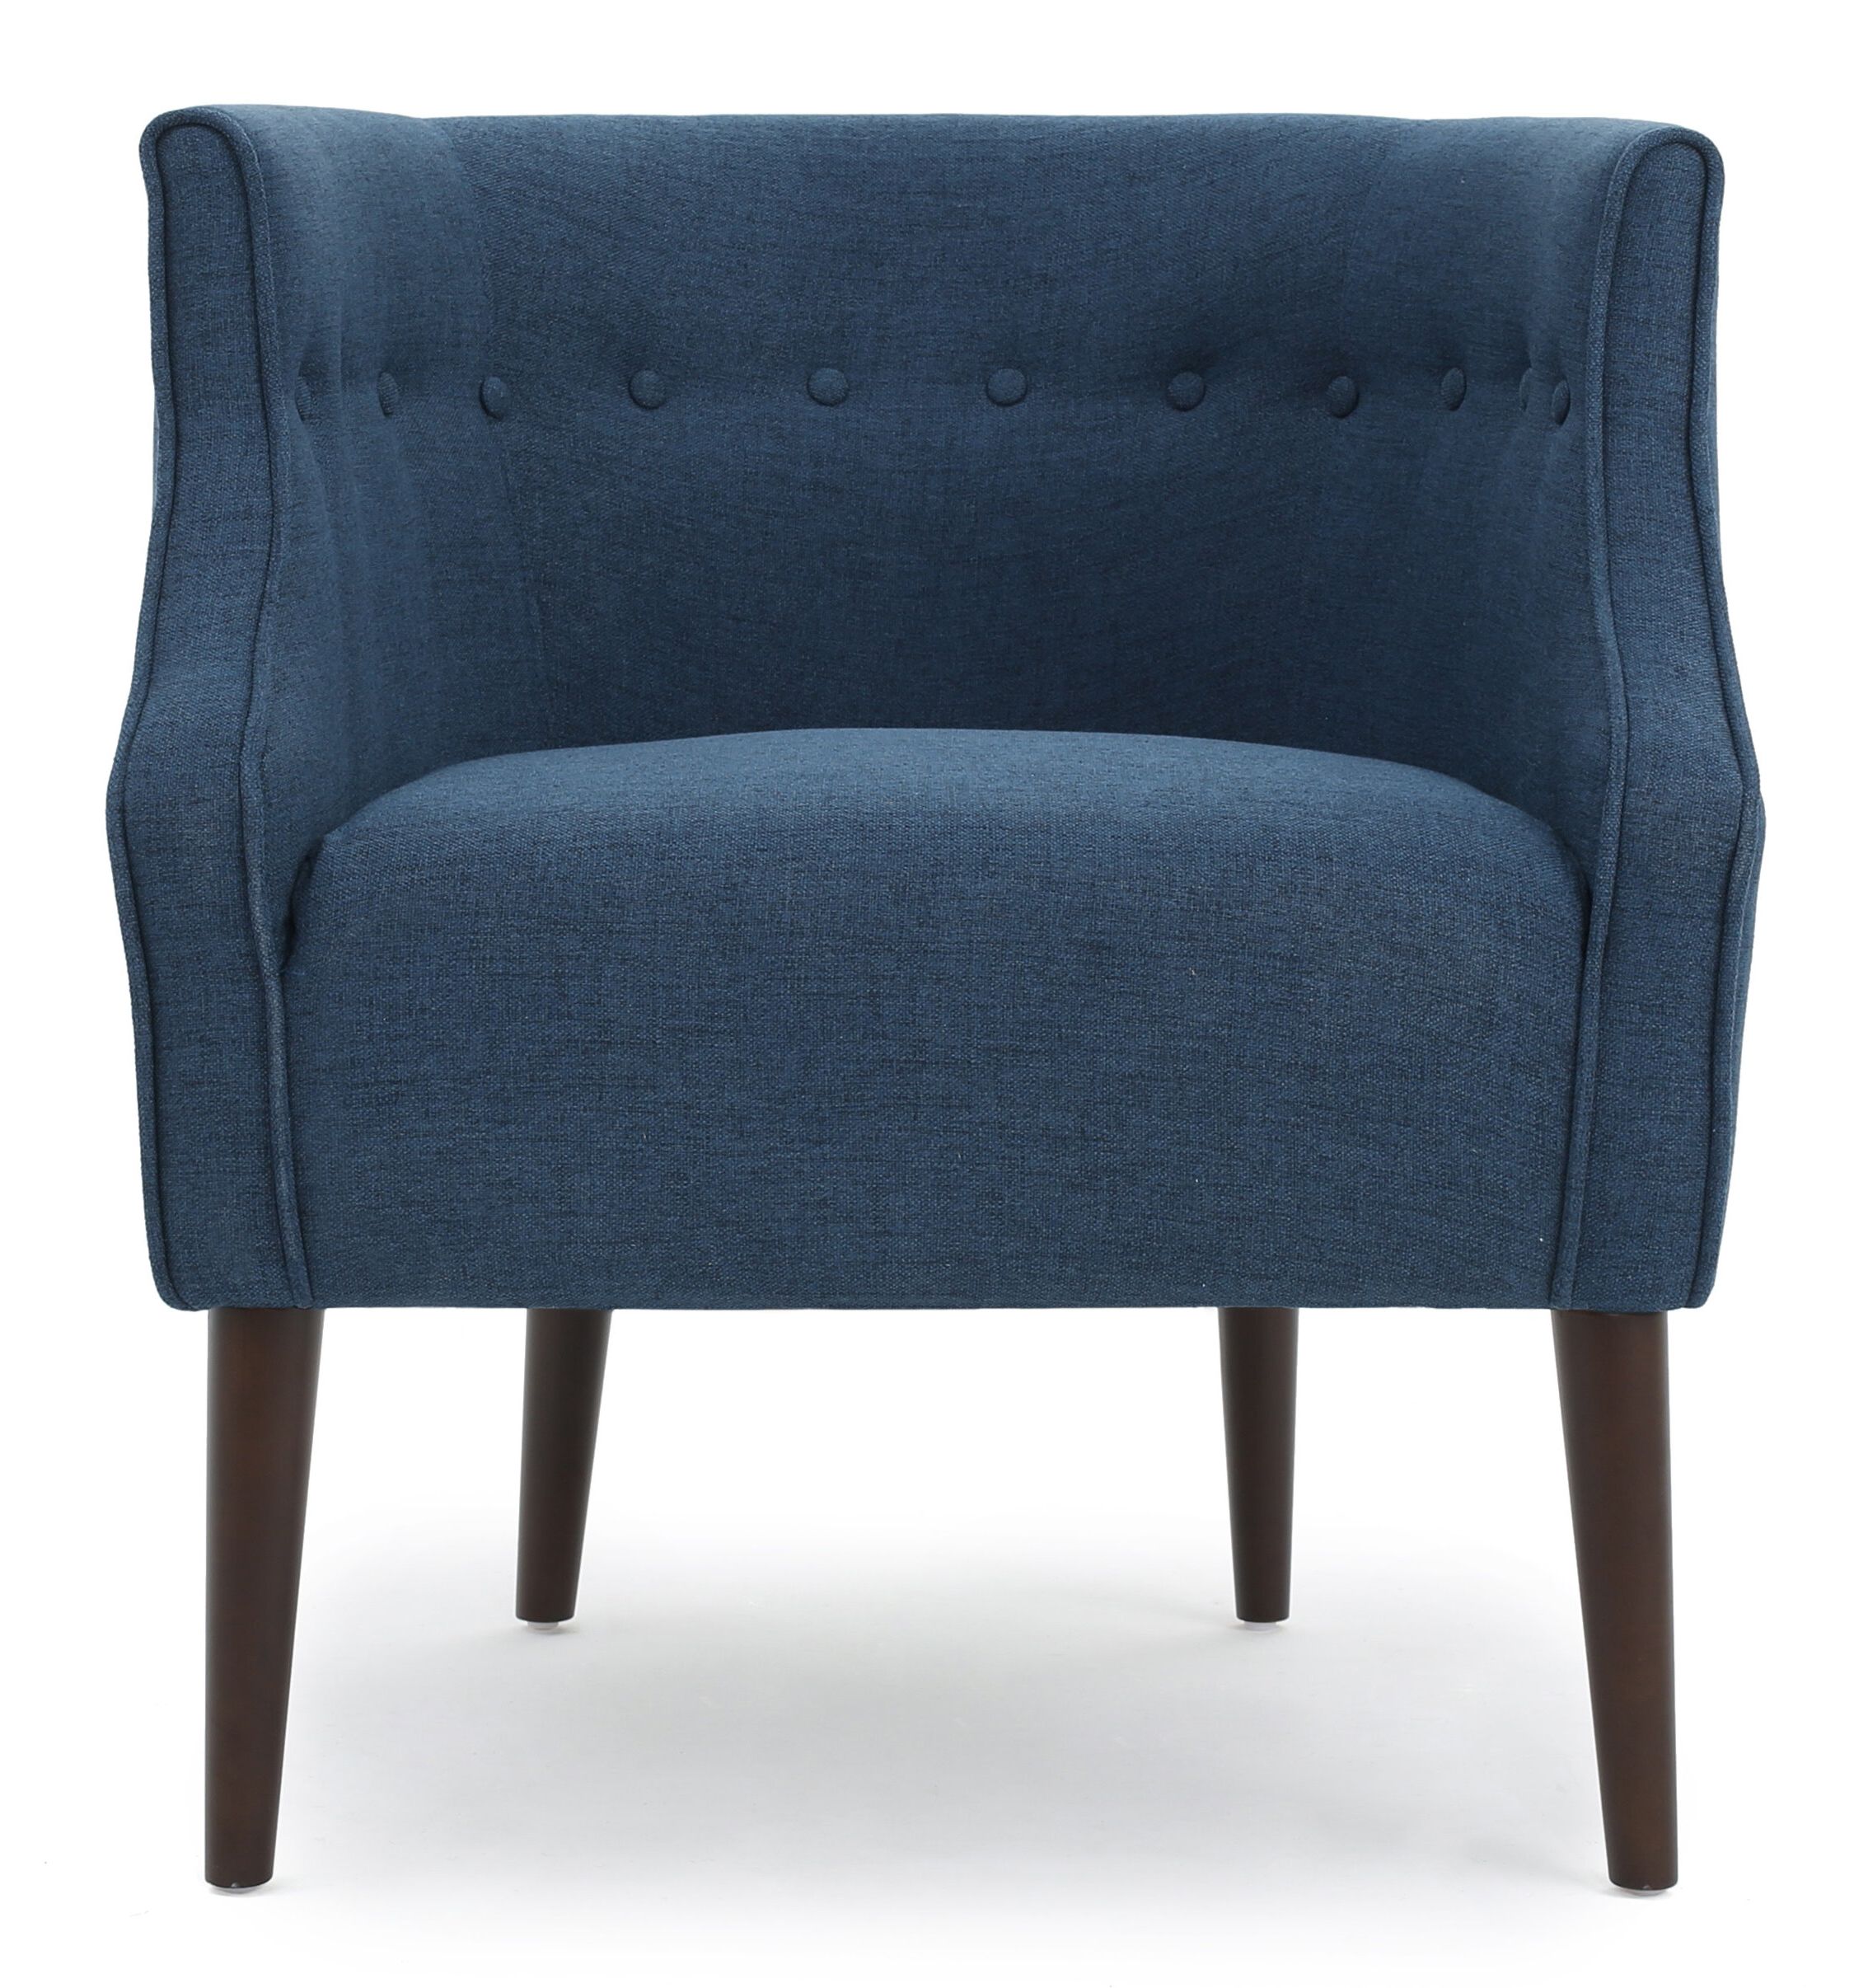 Newest Dorcaster Barrel Chairs Pertaining To Barrel Scandinavian Accent Chairs You'll Love In  (View 9 of 20)